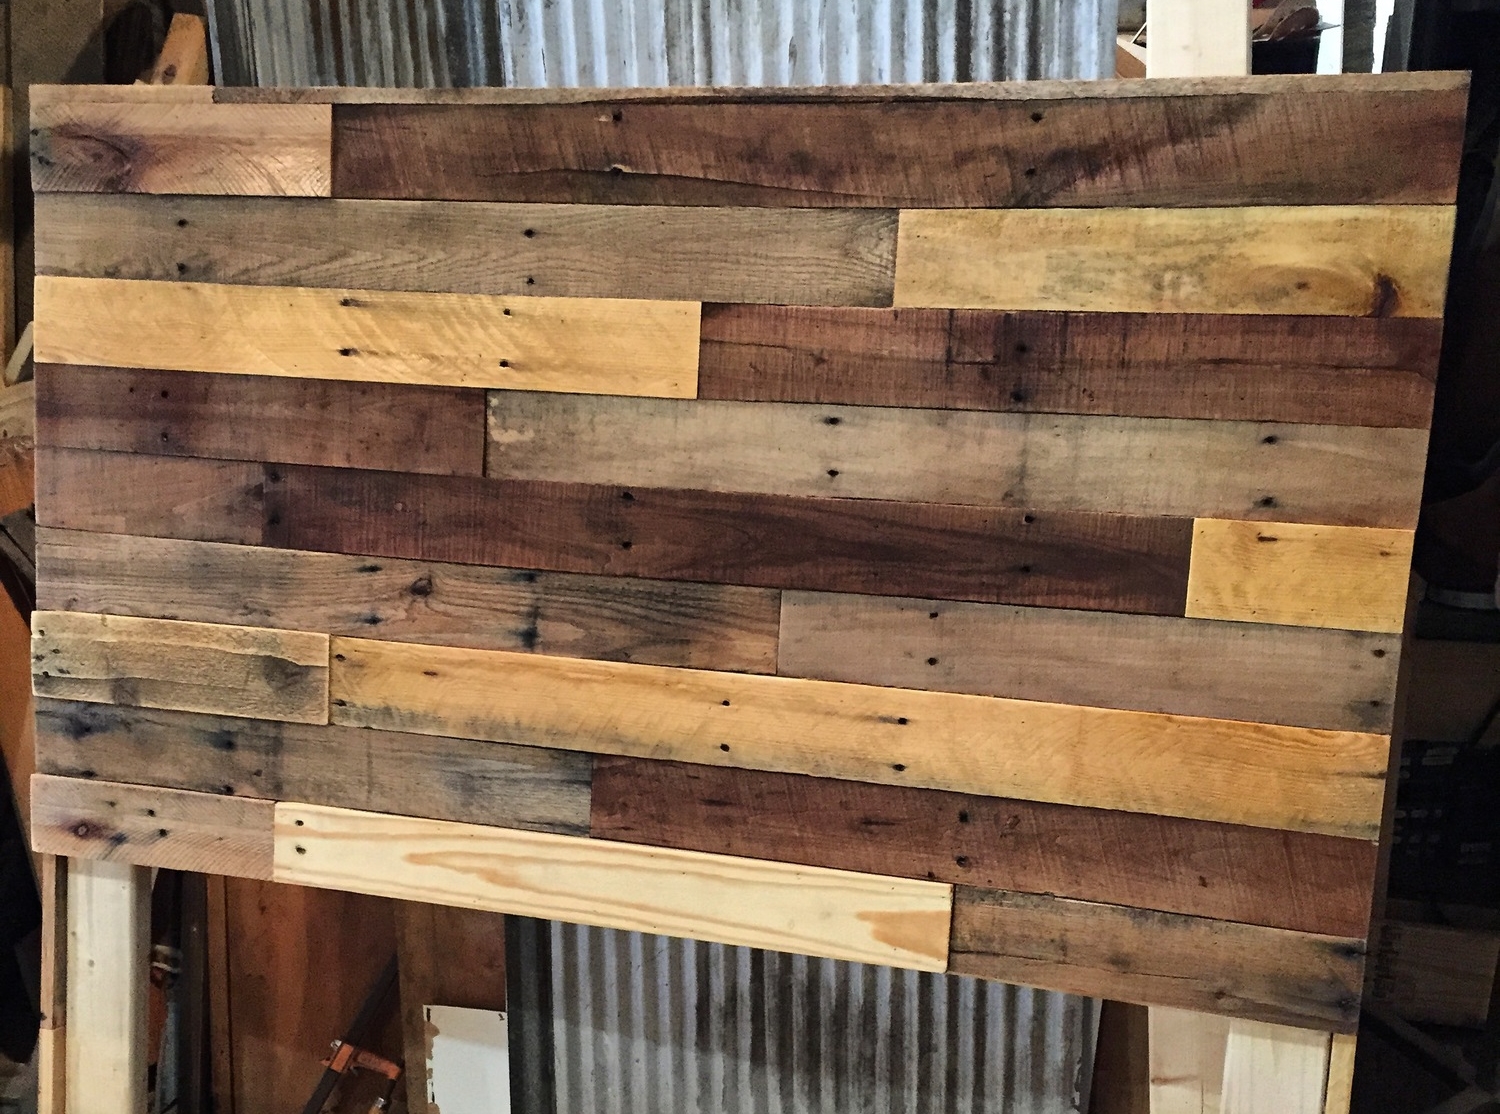 Pallet Wood Headboard Diy Revival, How To Make Bed Frame From Pallets